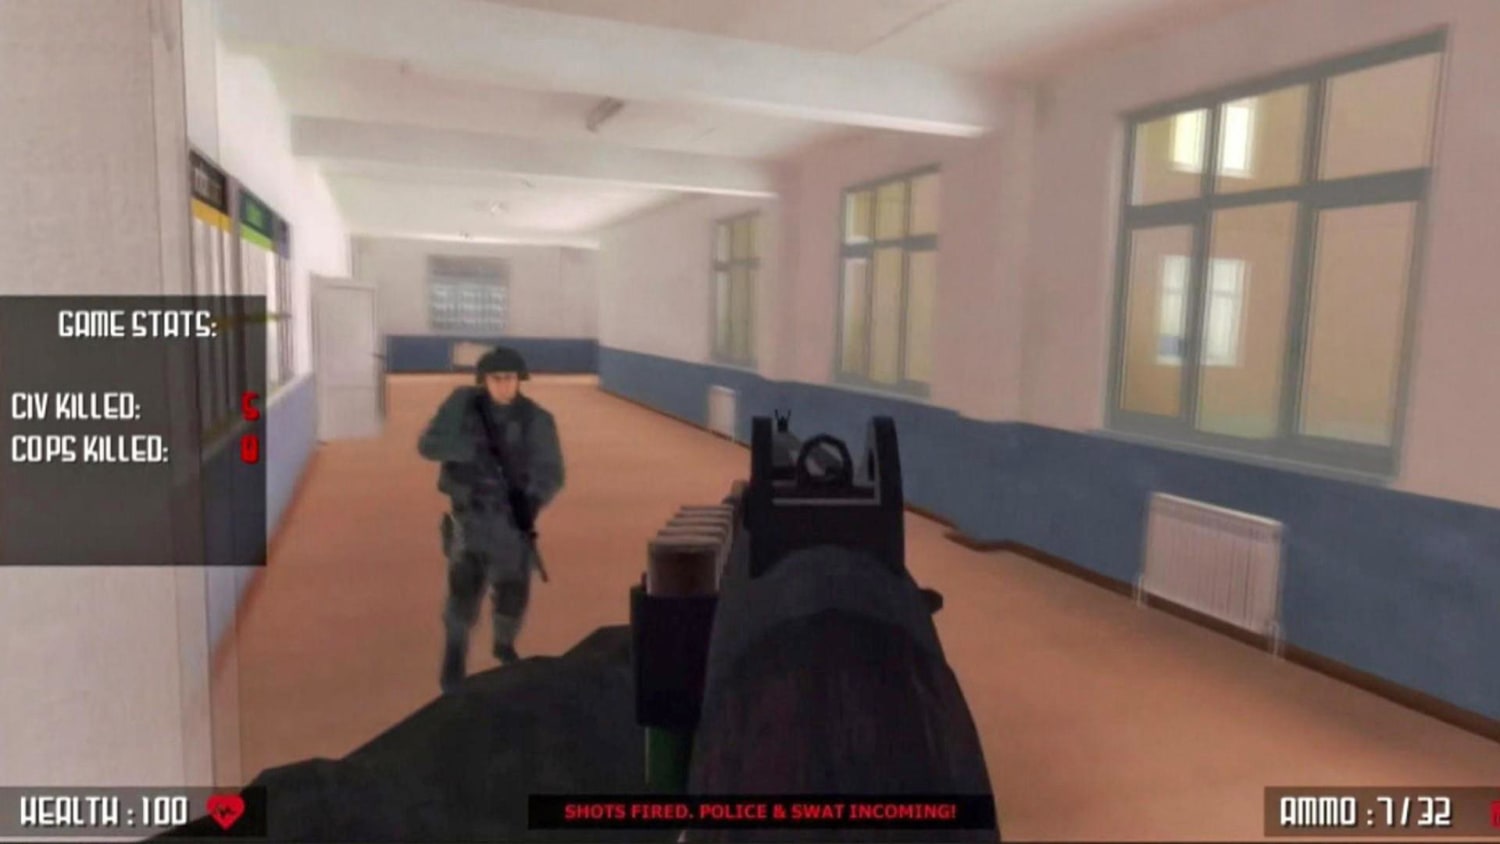 Active Shooter video game pulled from platform after outcry